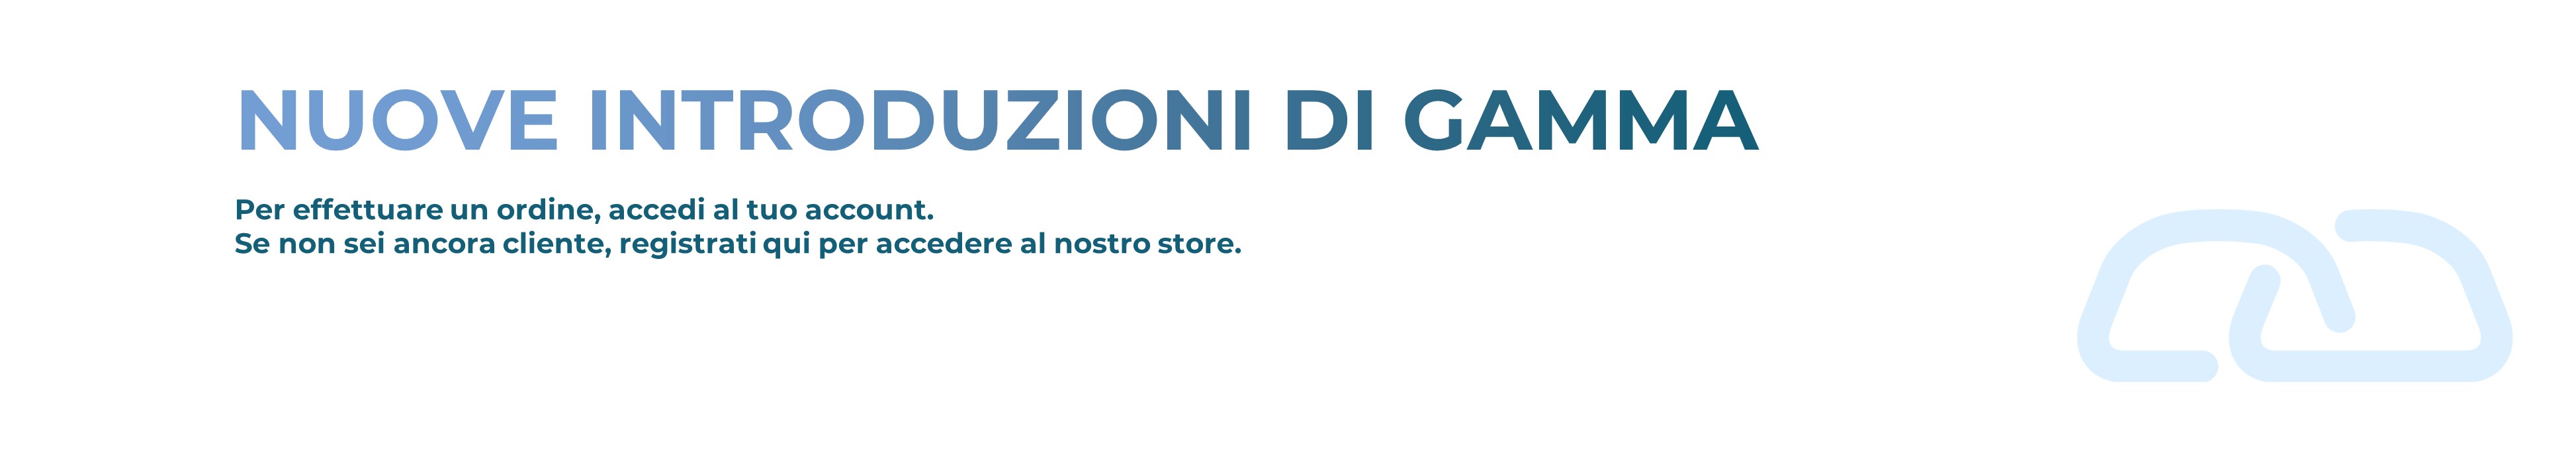 Call to action nuove introduzioni.jpg